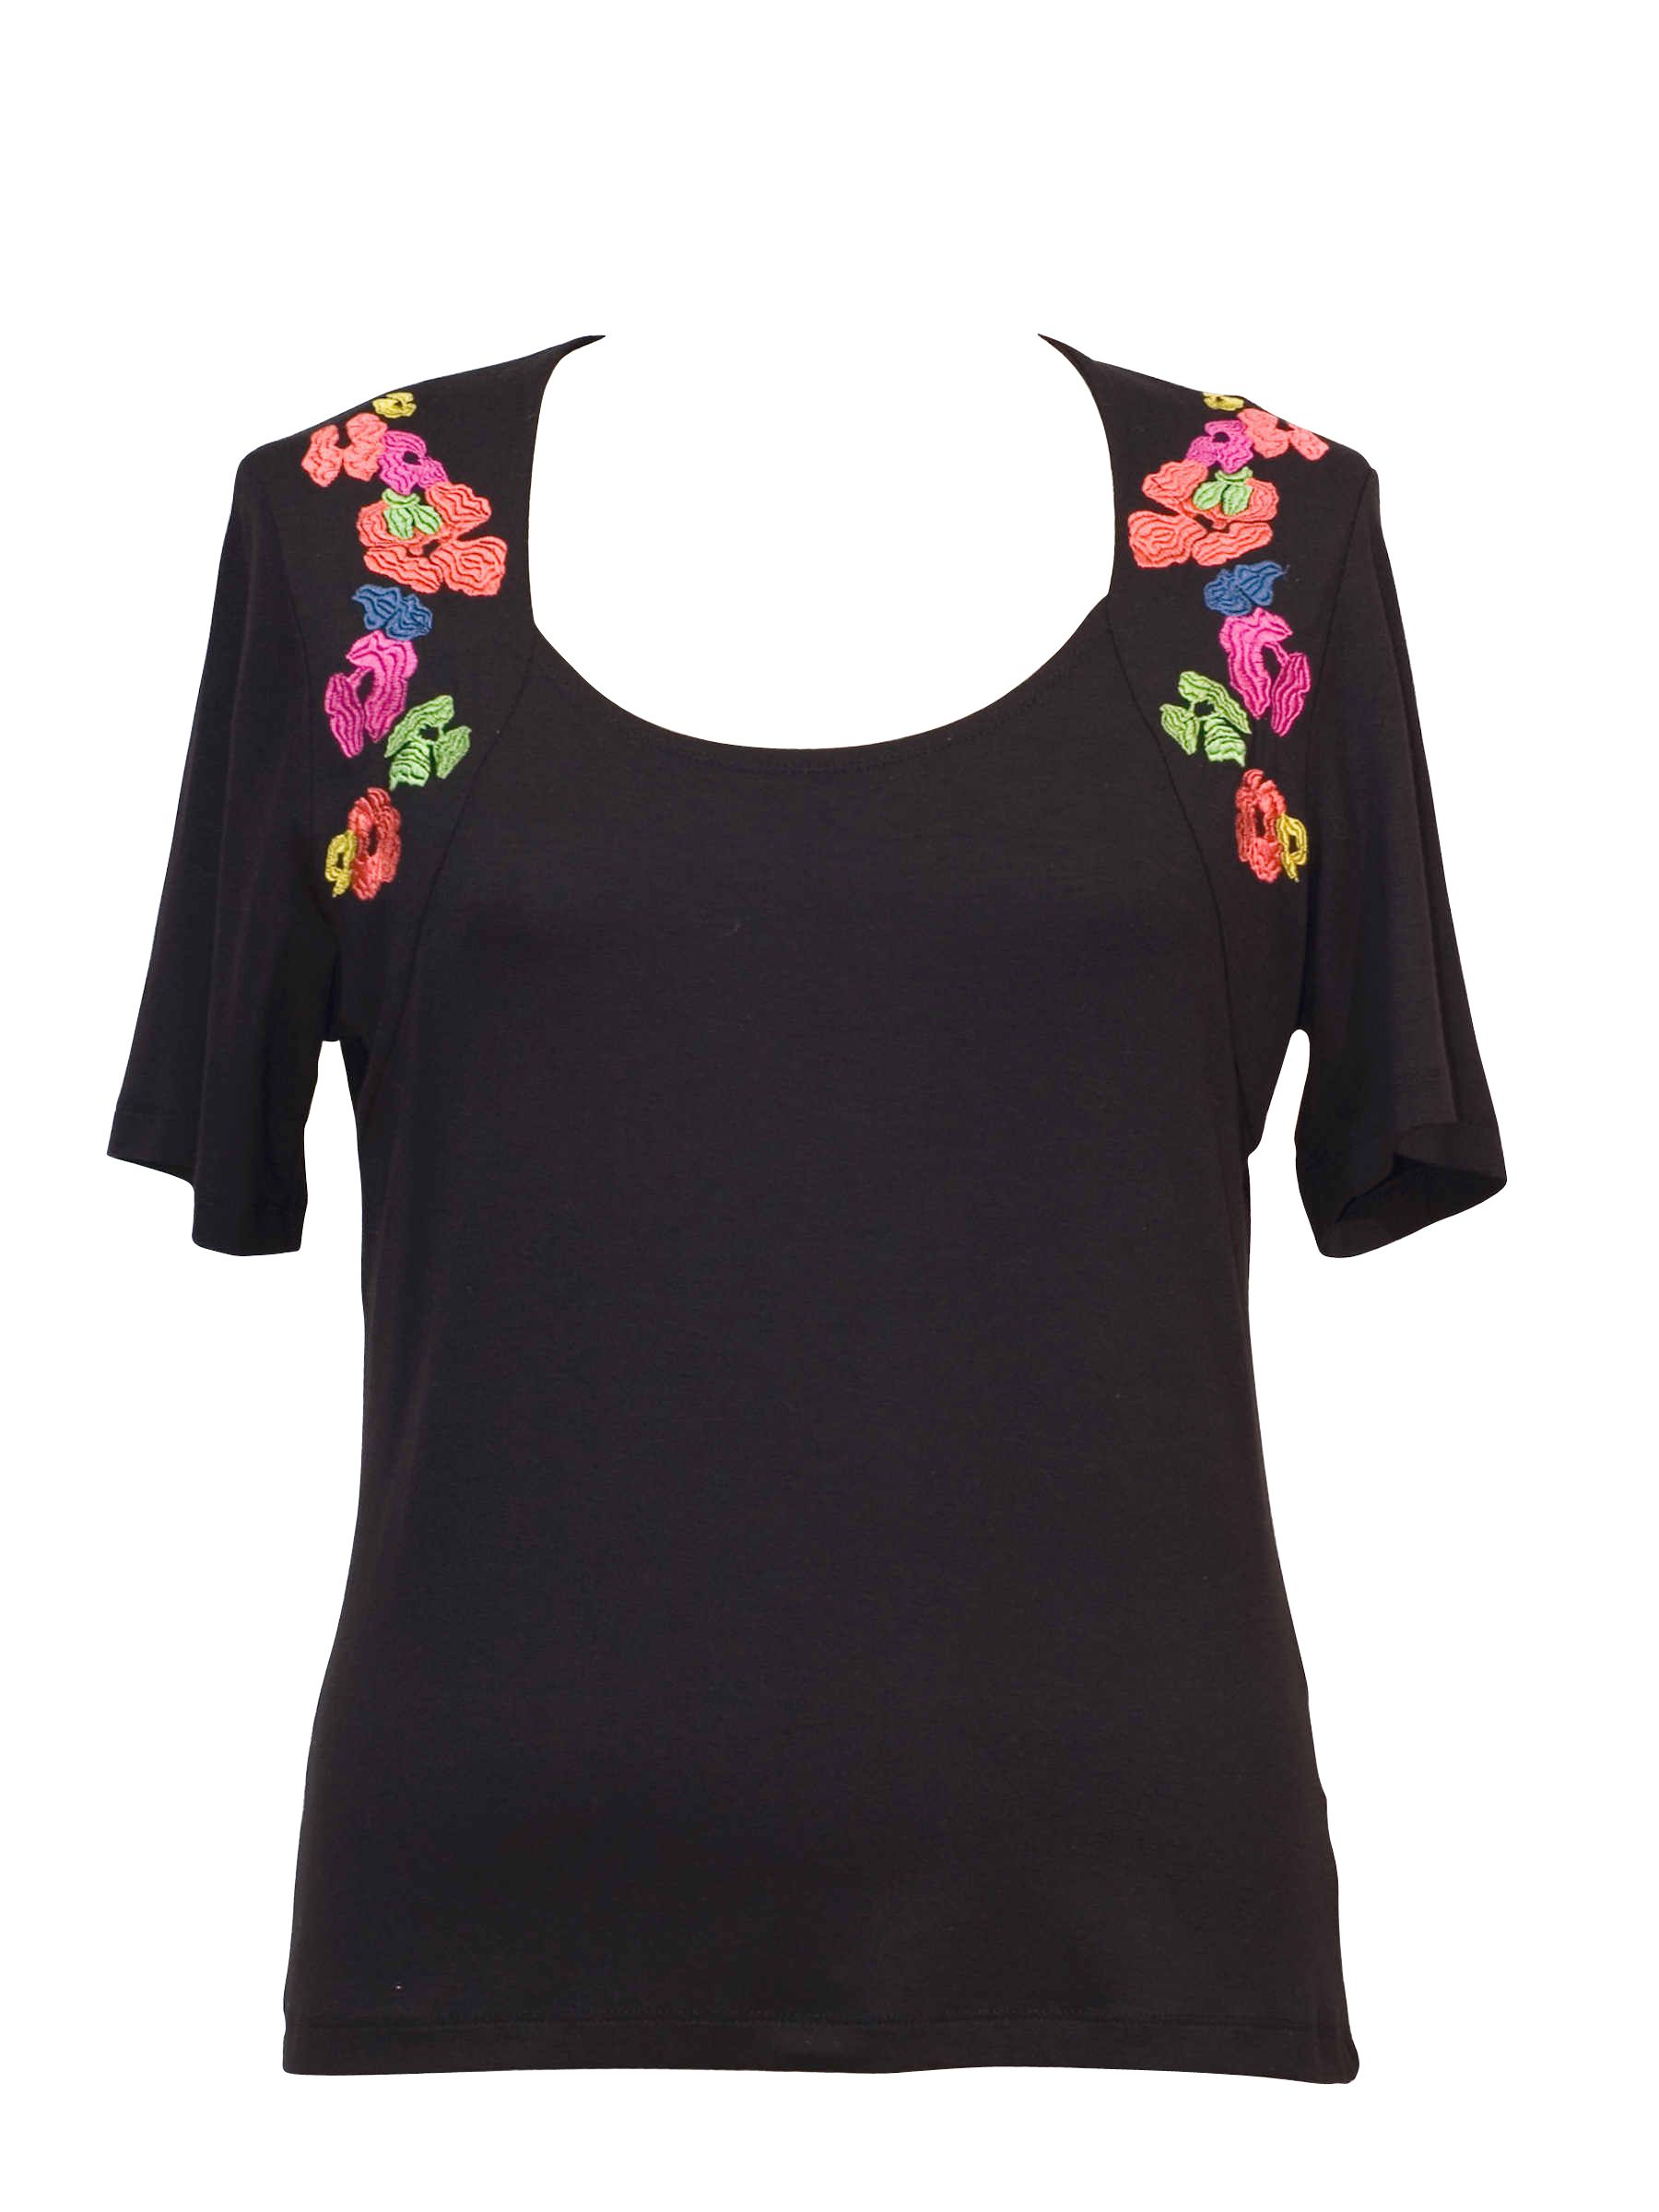 Chesca T-Shirt with Embroidered Motif, Black